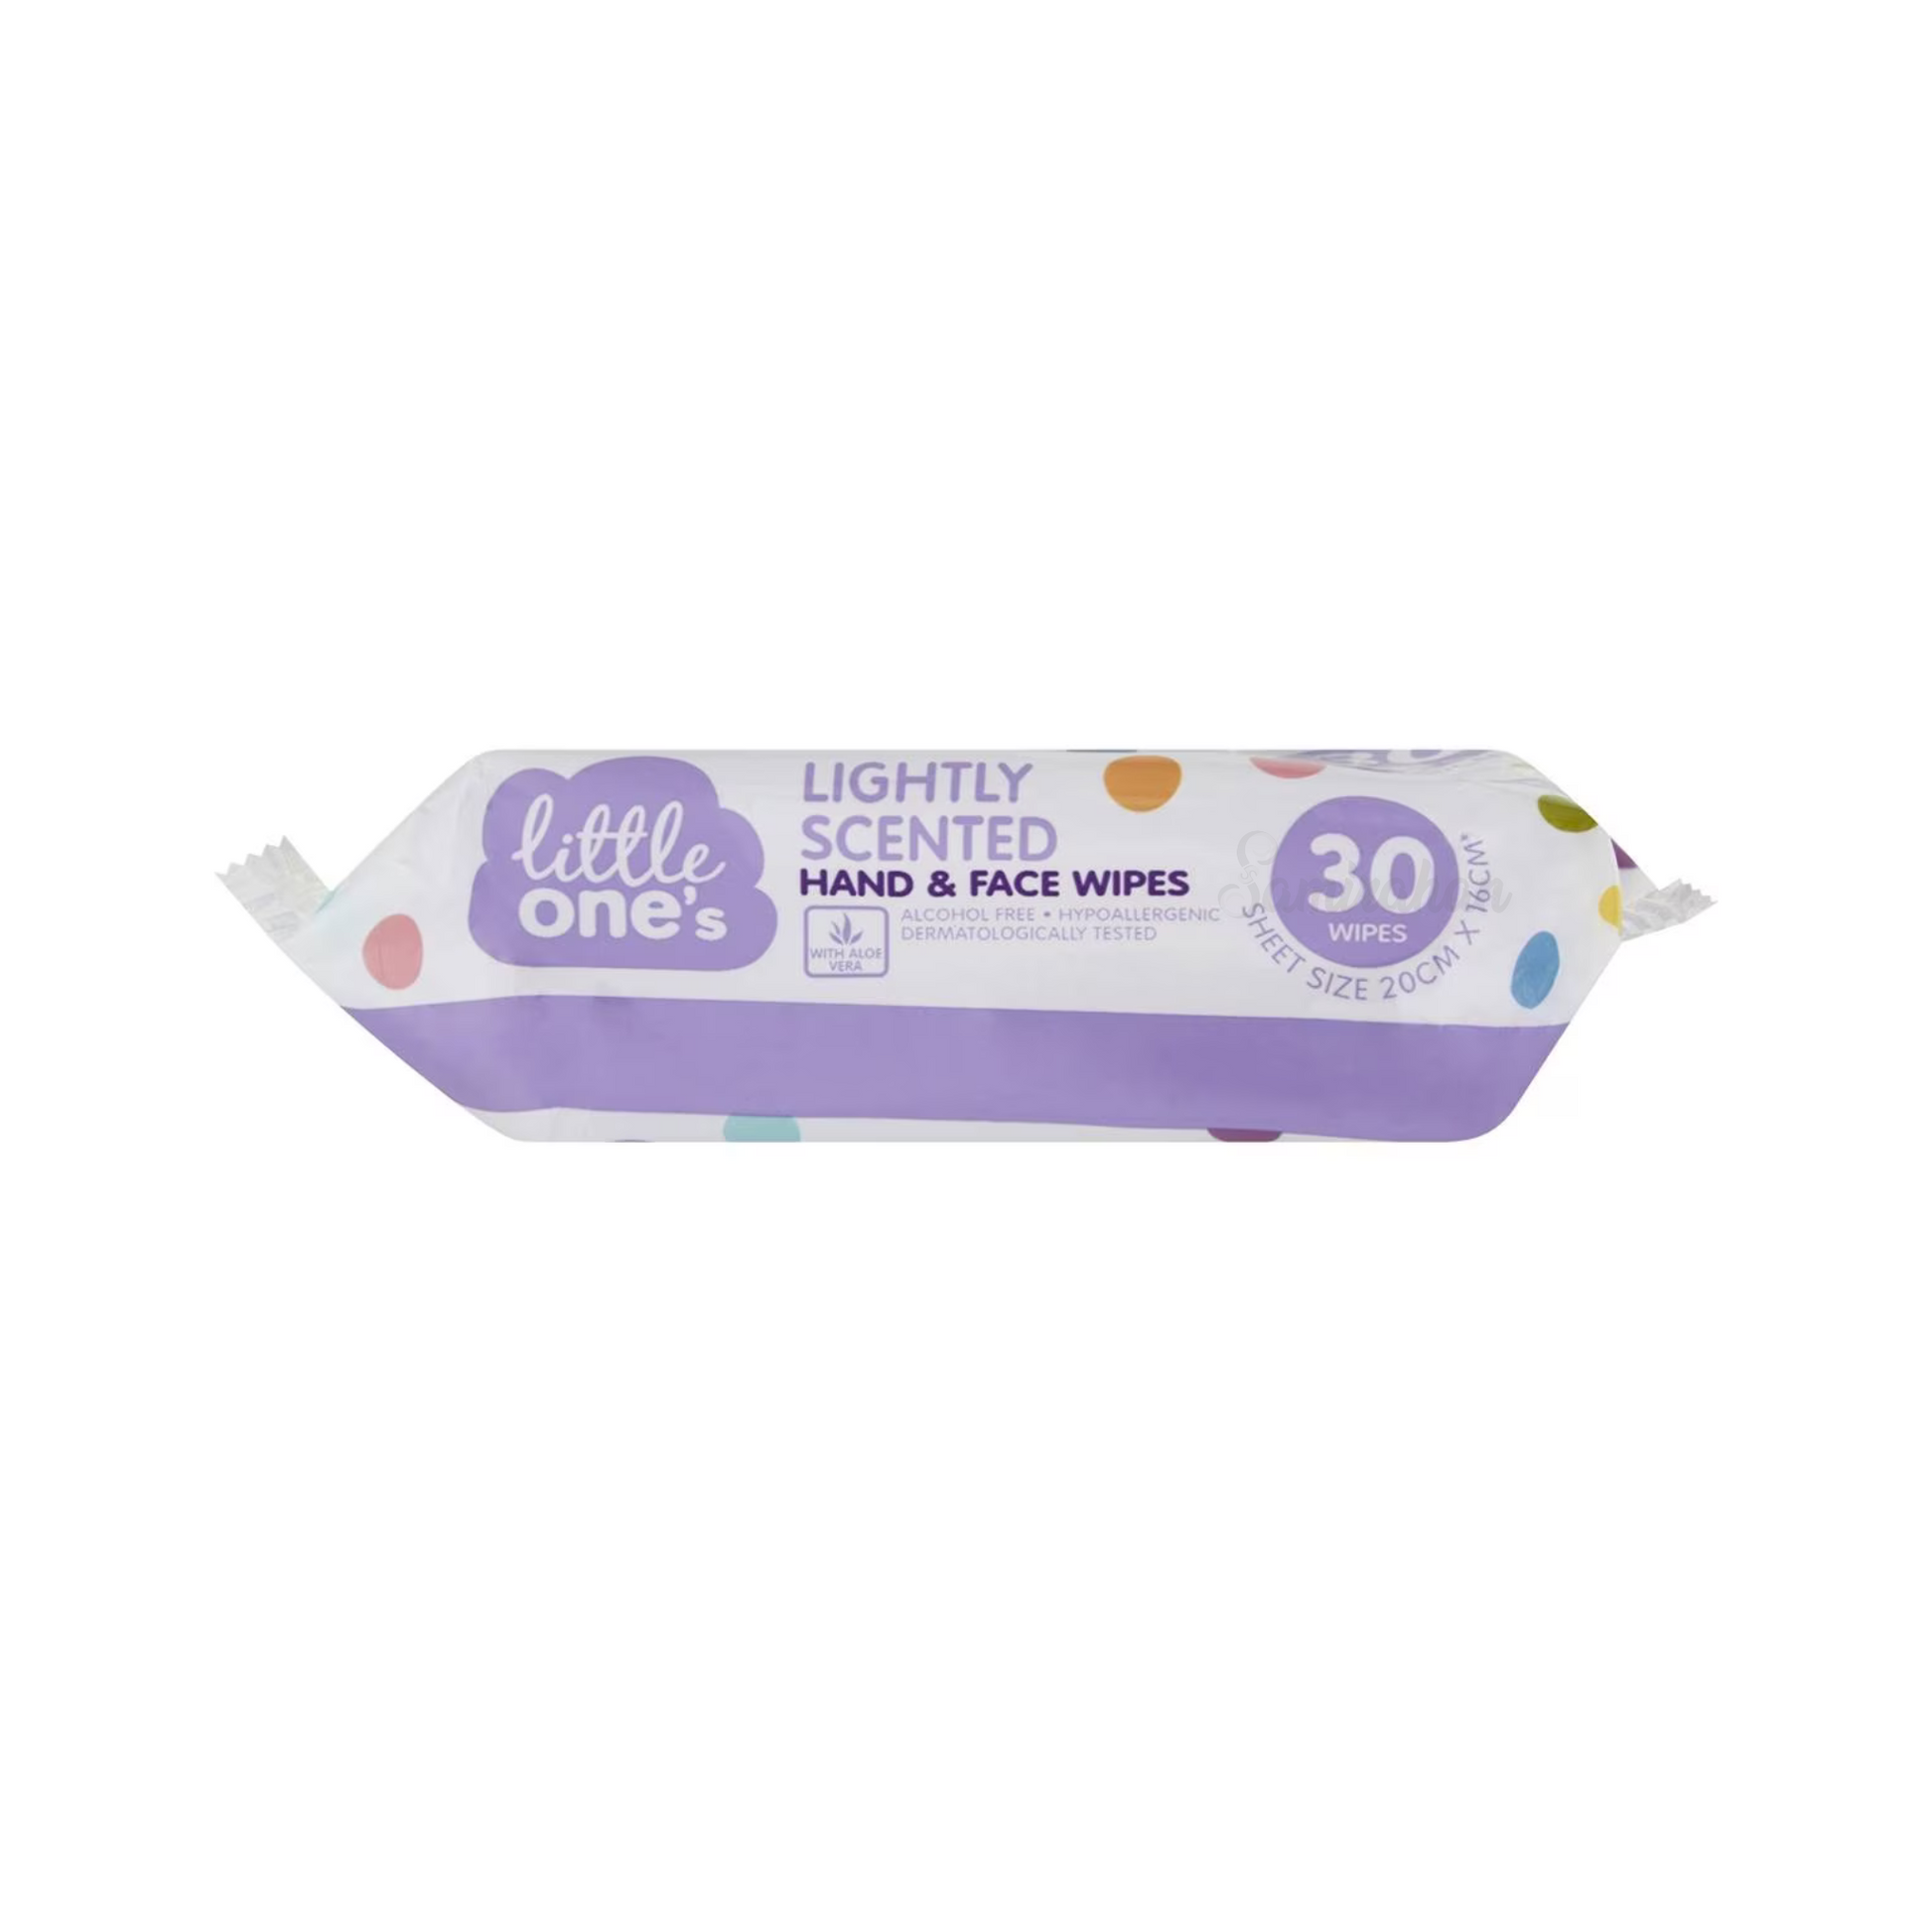 Little One's Hand & Face Baby Wipes, enriched with Aloe Vera, Vitamin E & Chamomile extract, are gentle enough for your baby's hands & face. The hypoallergenic formulation is alcohol & soap free, pH balanced & dermatologically tested. Best imported foreign nice smelling baby wipes in Dhaka Bangladesh. Australian brand.